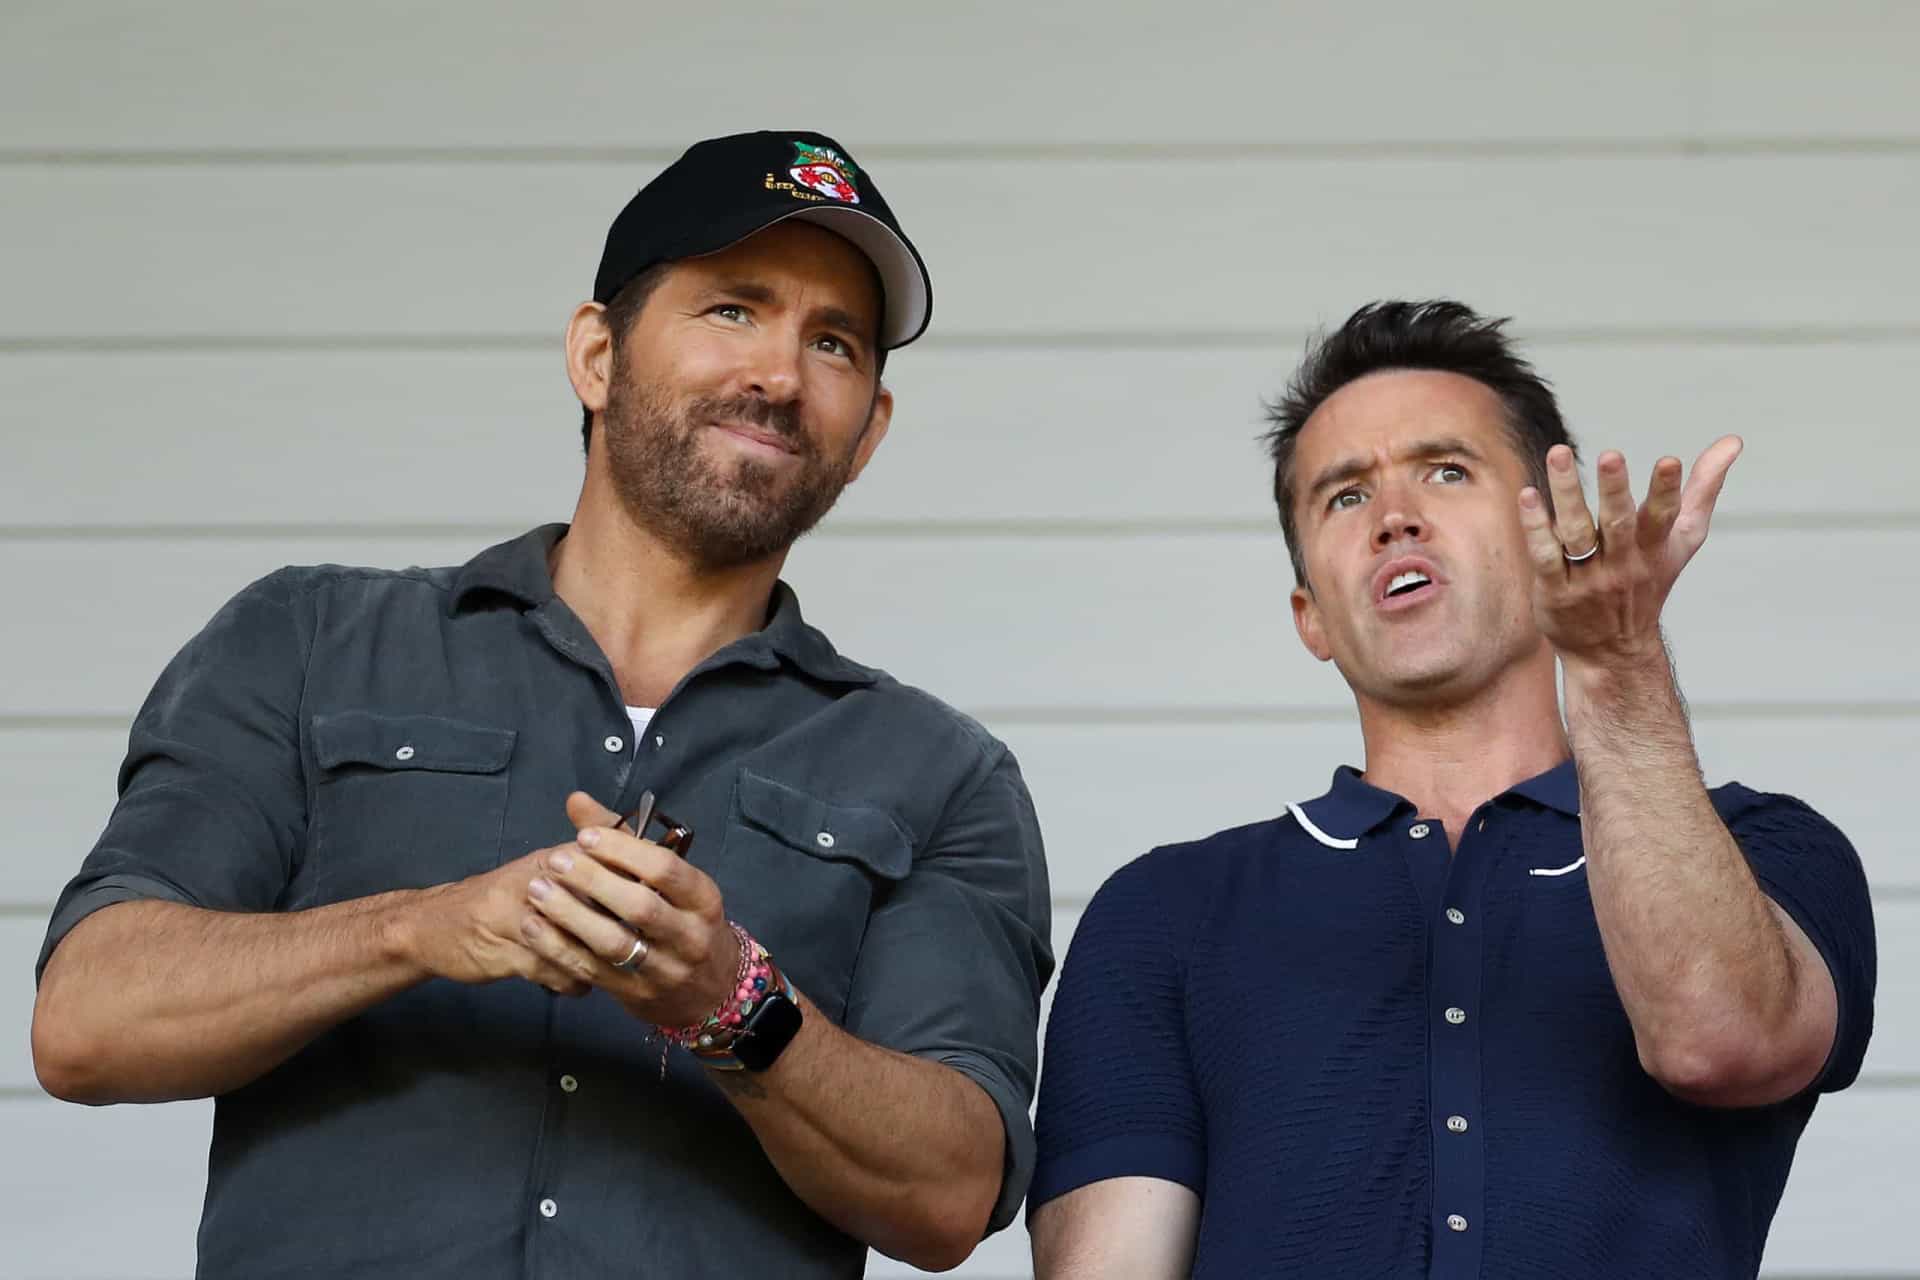 <p>Actors Ryan Reynolds and Rob McElhenney both recently got a colonoscopy to raise awareness about colorectal cancer in people under 50. This is the third most frequently diagnosed cancer in the US.</p><p><a href="https://www.msn.com/en-us/community/channel/vid-7xx8mnucu55yw63we9va2gwr7uihbxwc68fxqp25x6tg4ftibpra?cvid=94631541bc0f4f89bfd59158d696ad7e">Follow us and access great exclusive content everyday</a></p>